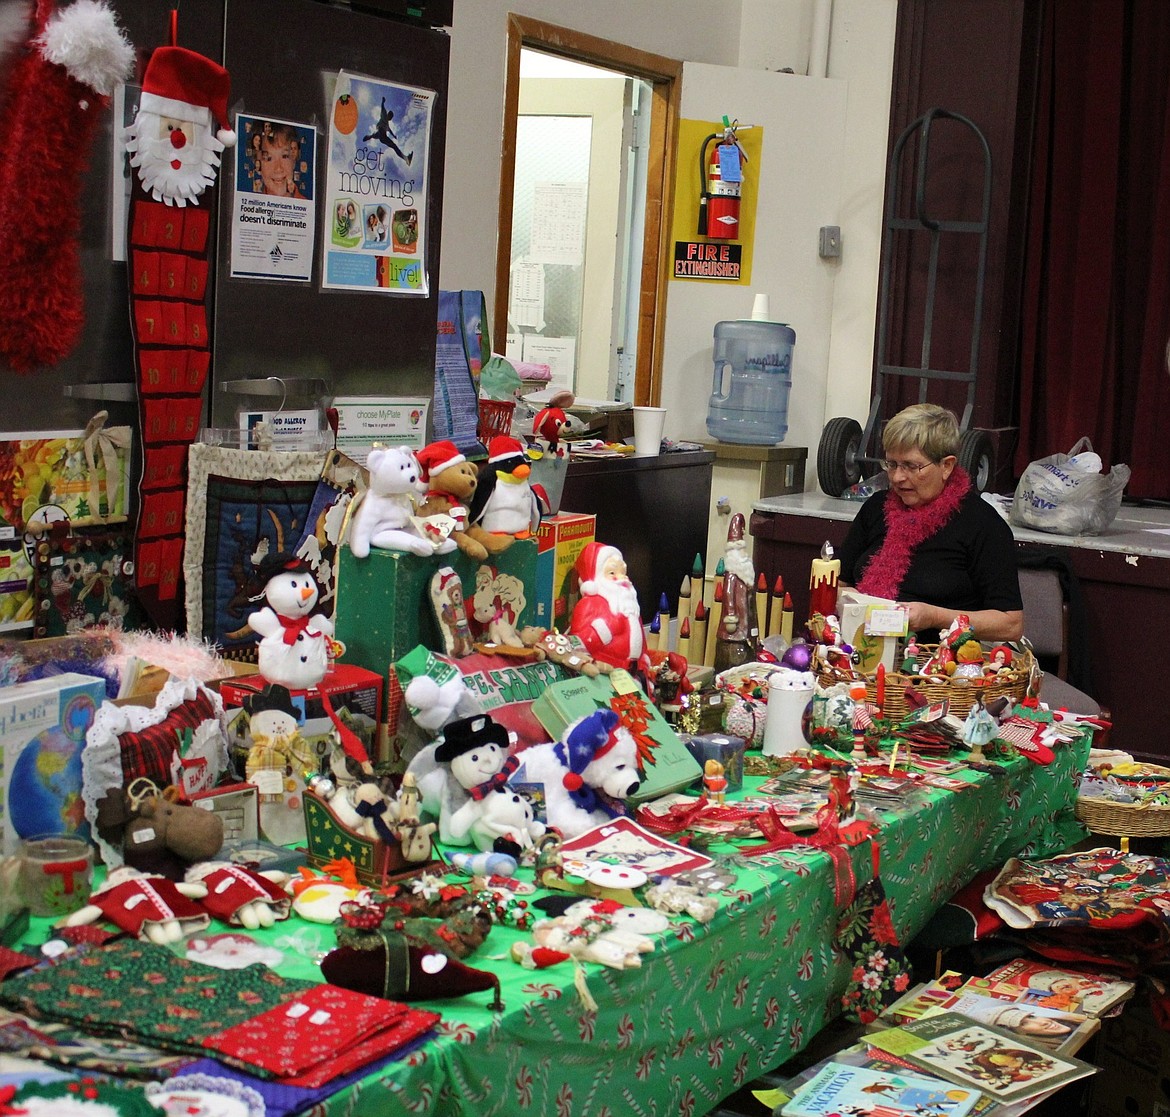 Vendors had tables filled with holiday gift ideas at the craft fair held in the school cafeteria at Alberton School on Saturday. (Photo by Kathleen Woodford/Mineral Independent)